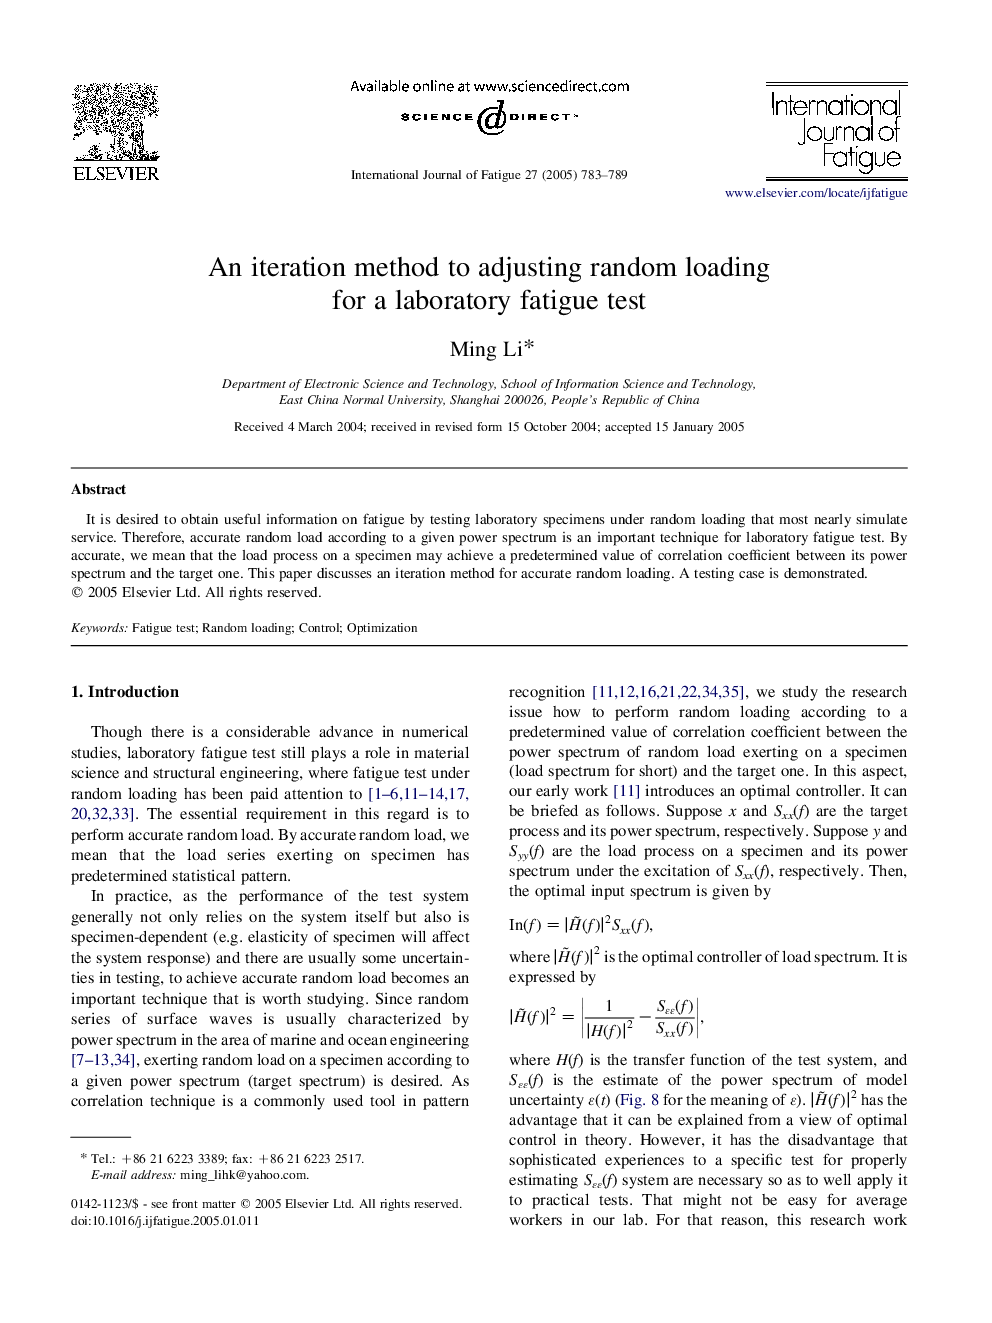 An iteration method to adjusting random loading for a laboratory fatigue test